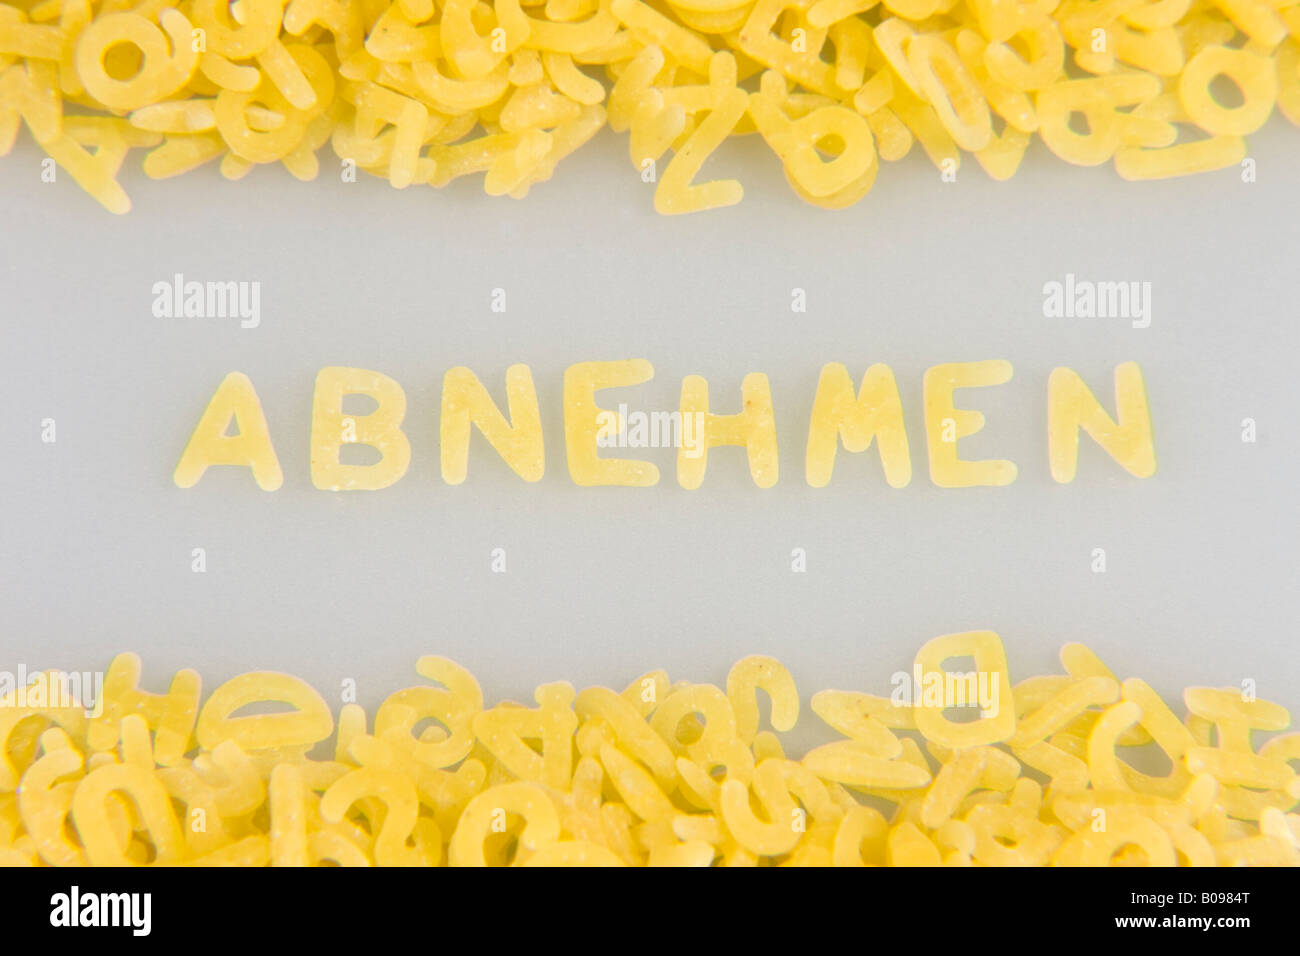 'Abnehmen' (lose weight) written in noodle letters, pasta alphabet Stock Photo